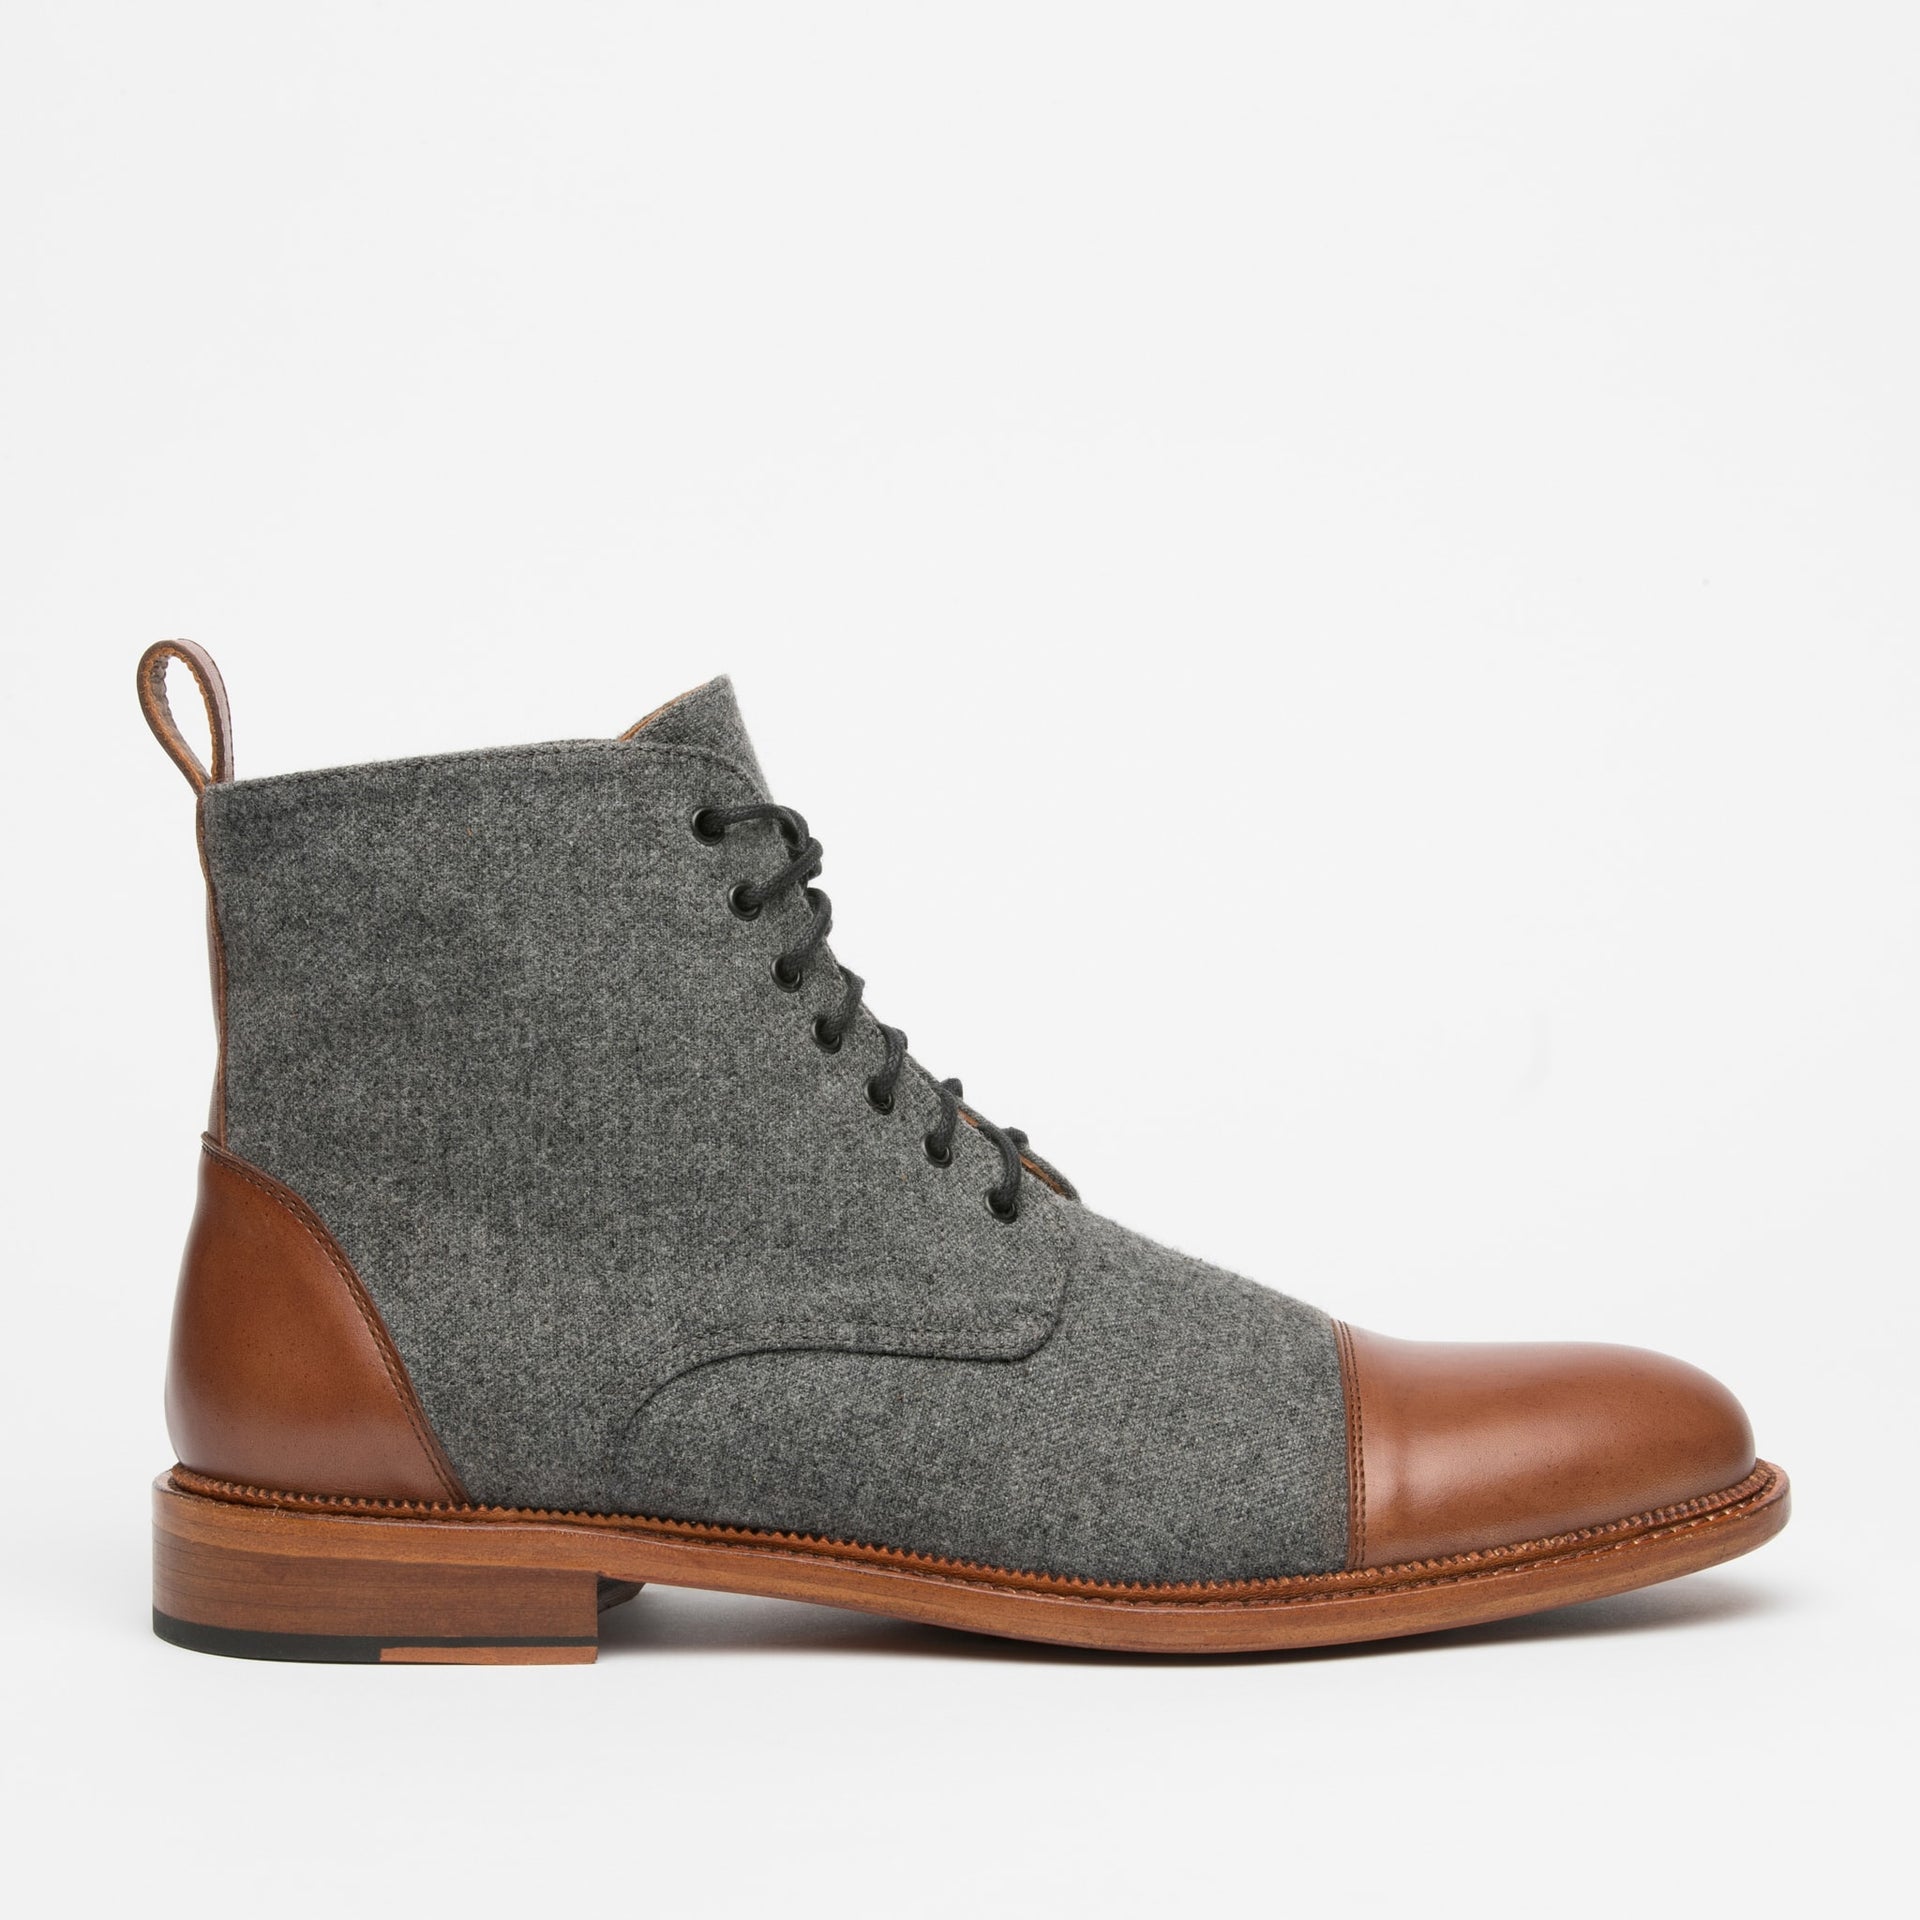 The Jack Boot - Grey / Brown Leather Boot | TAFT